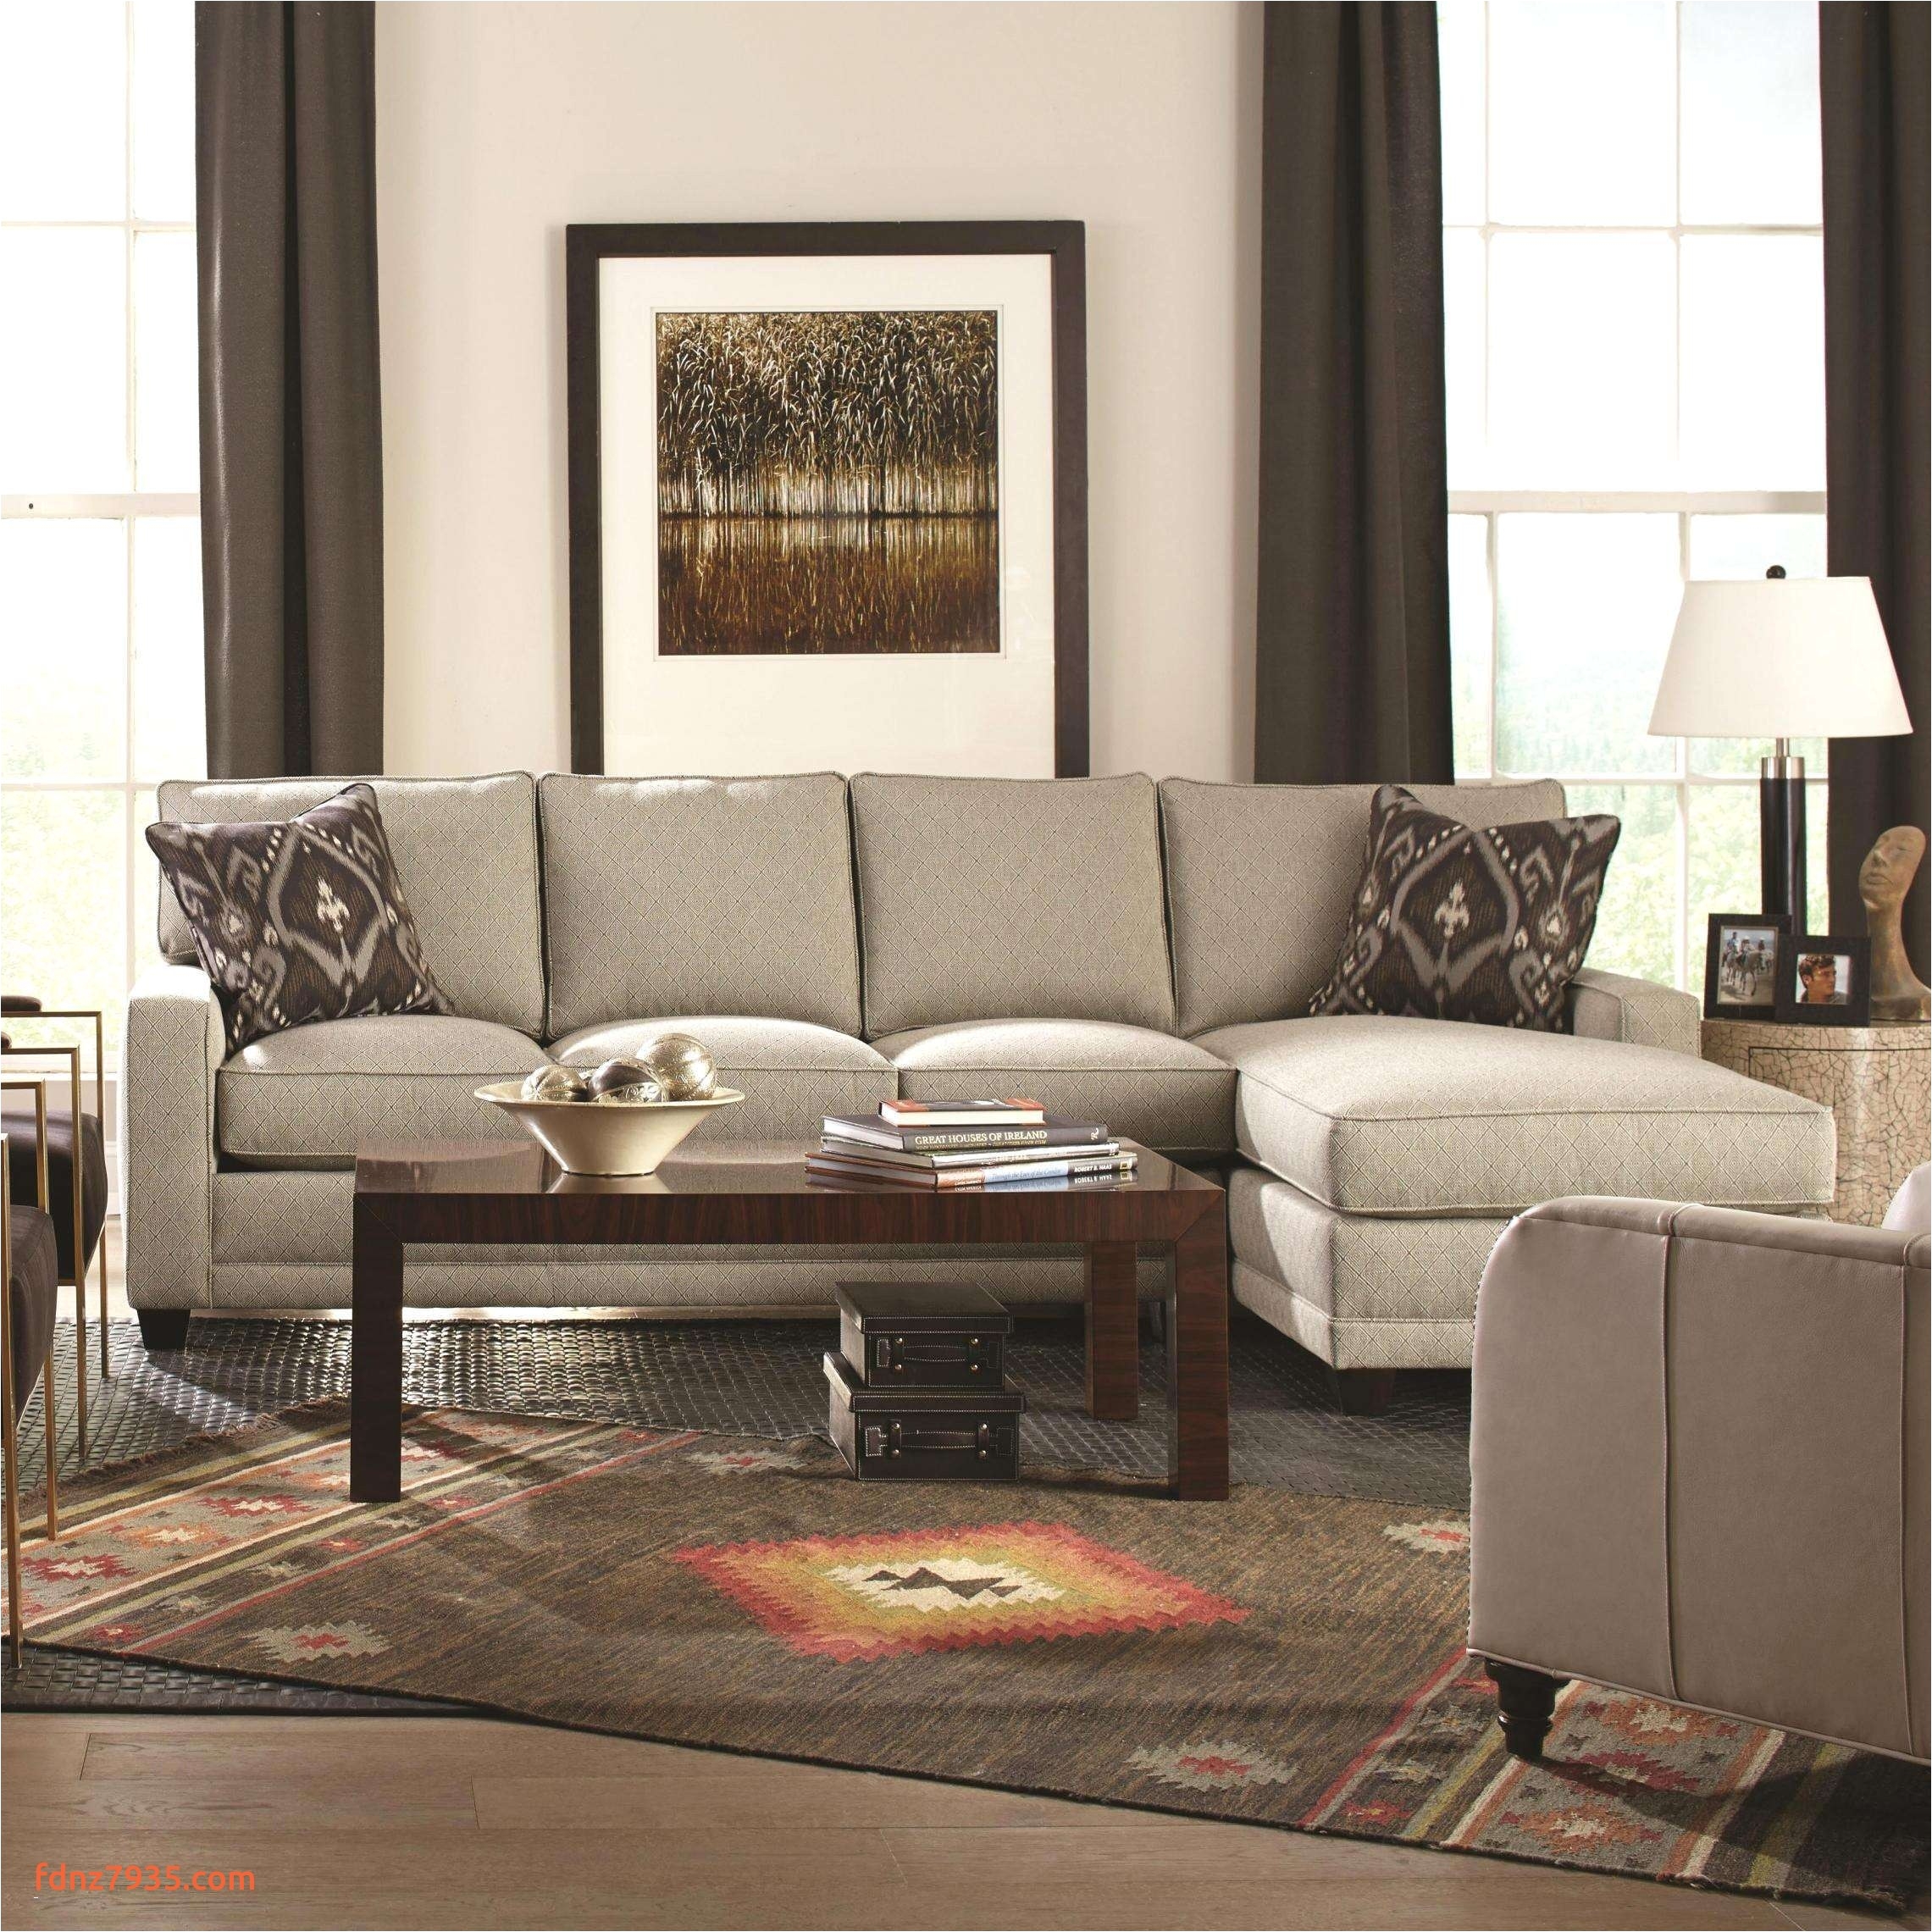 light brown leather sofa new sectional sofa small living room unique sectional couch 0d tags